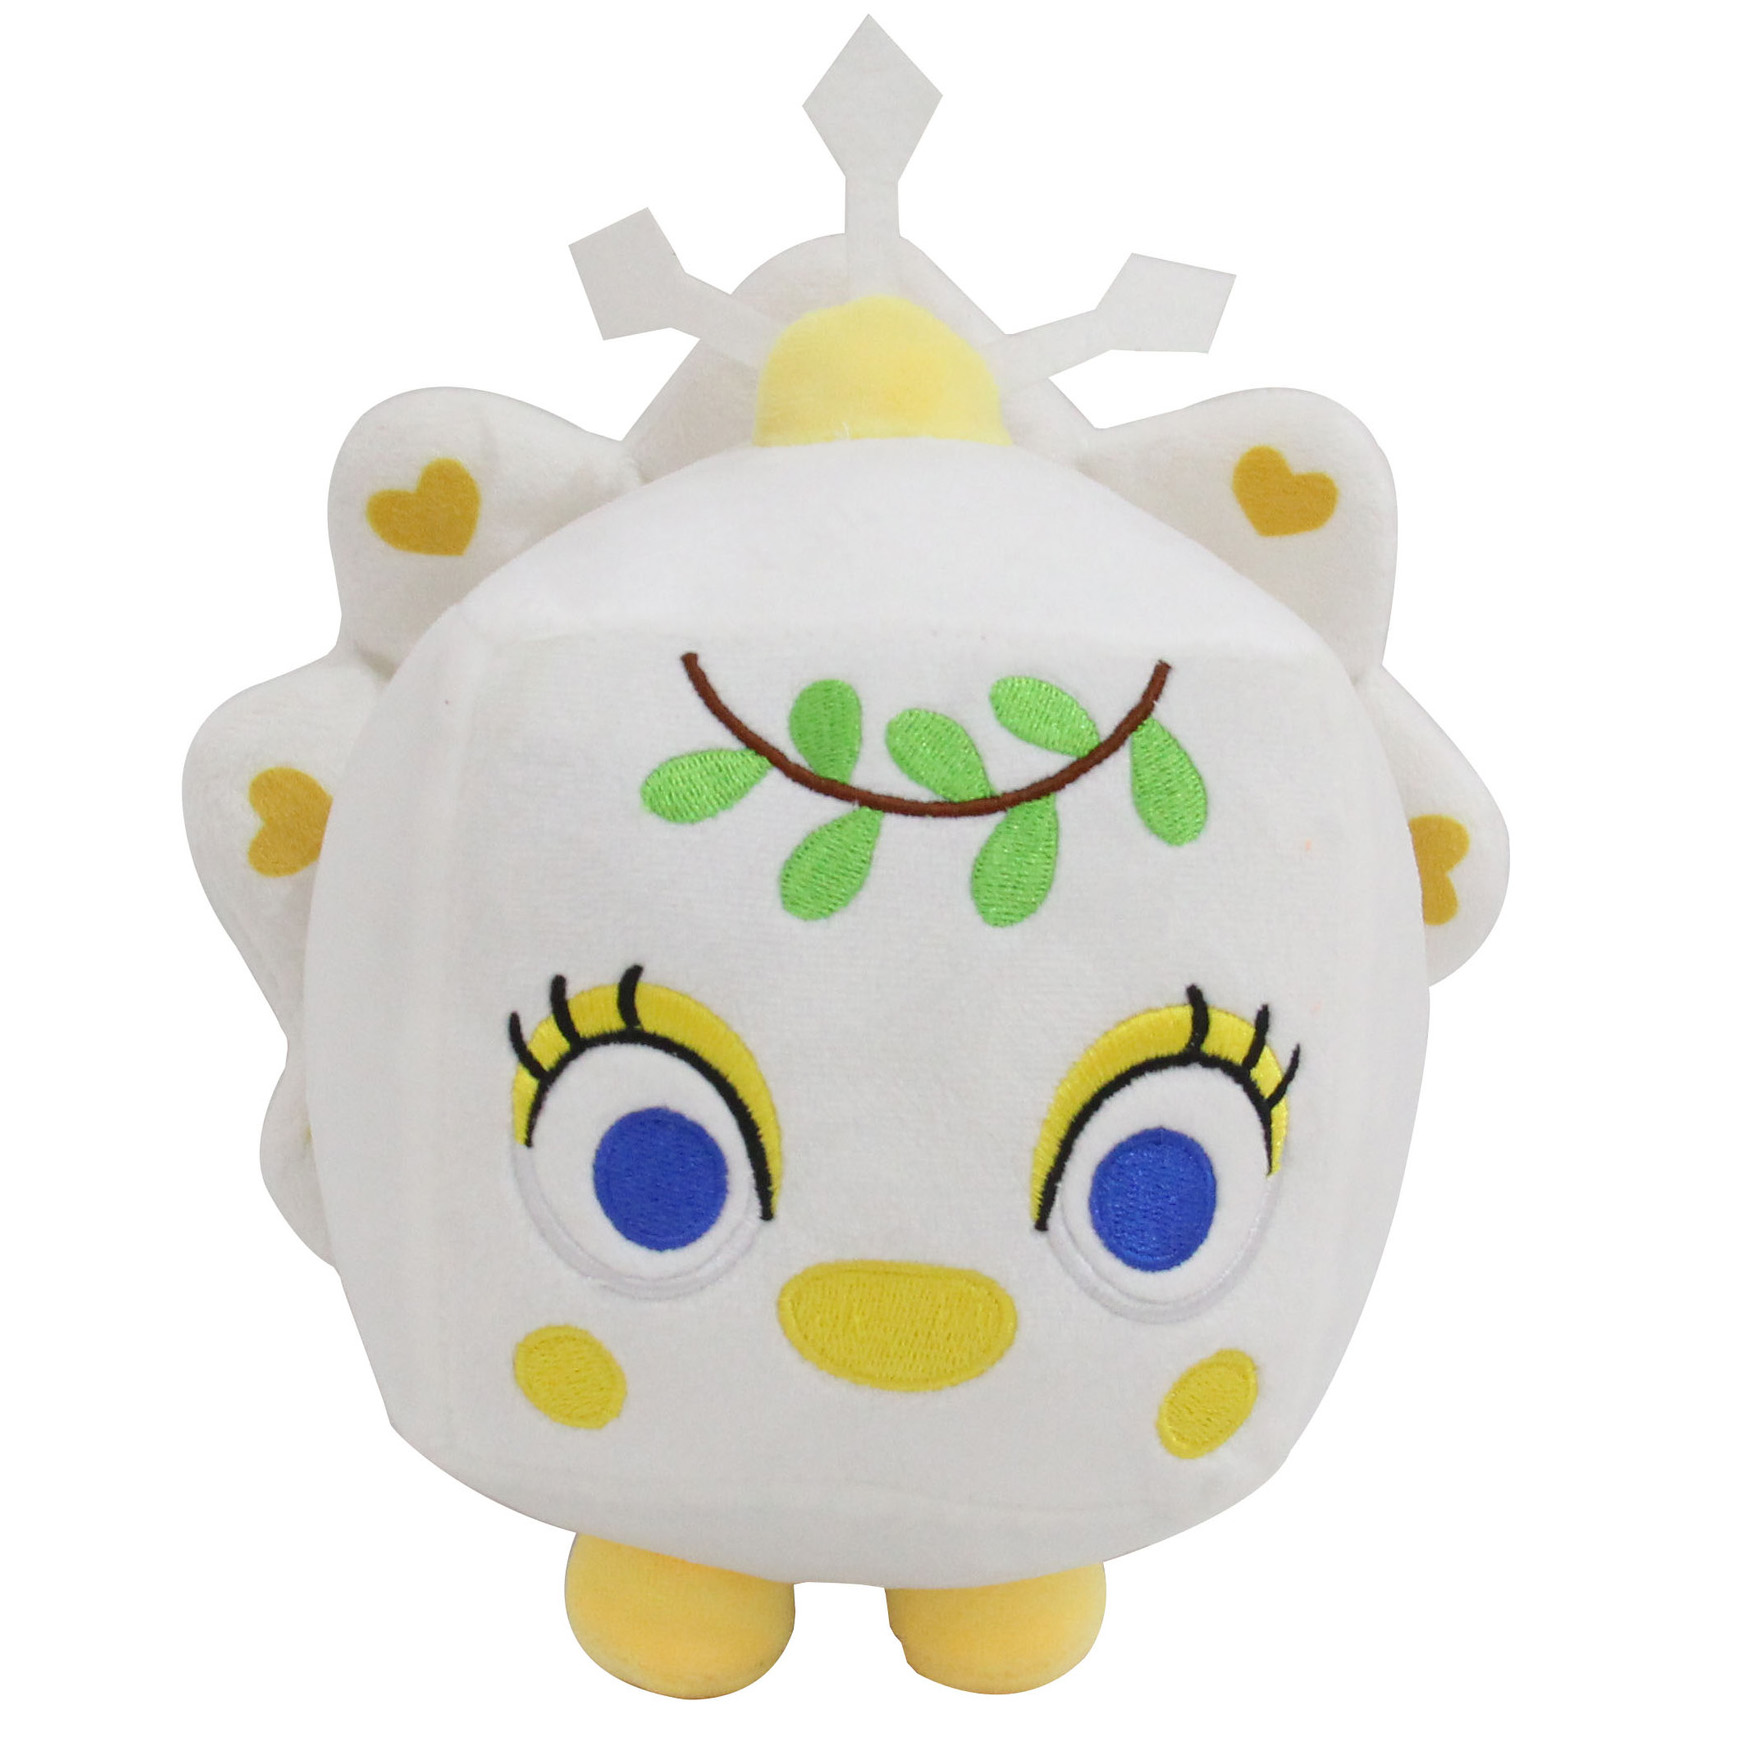 White Peacock Stuffed Animal Cute Kawaii Soft Toy for Kids and Fans